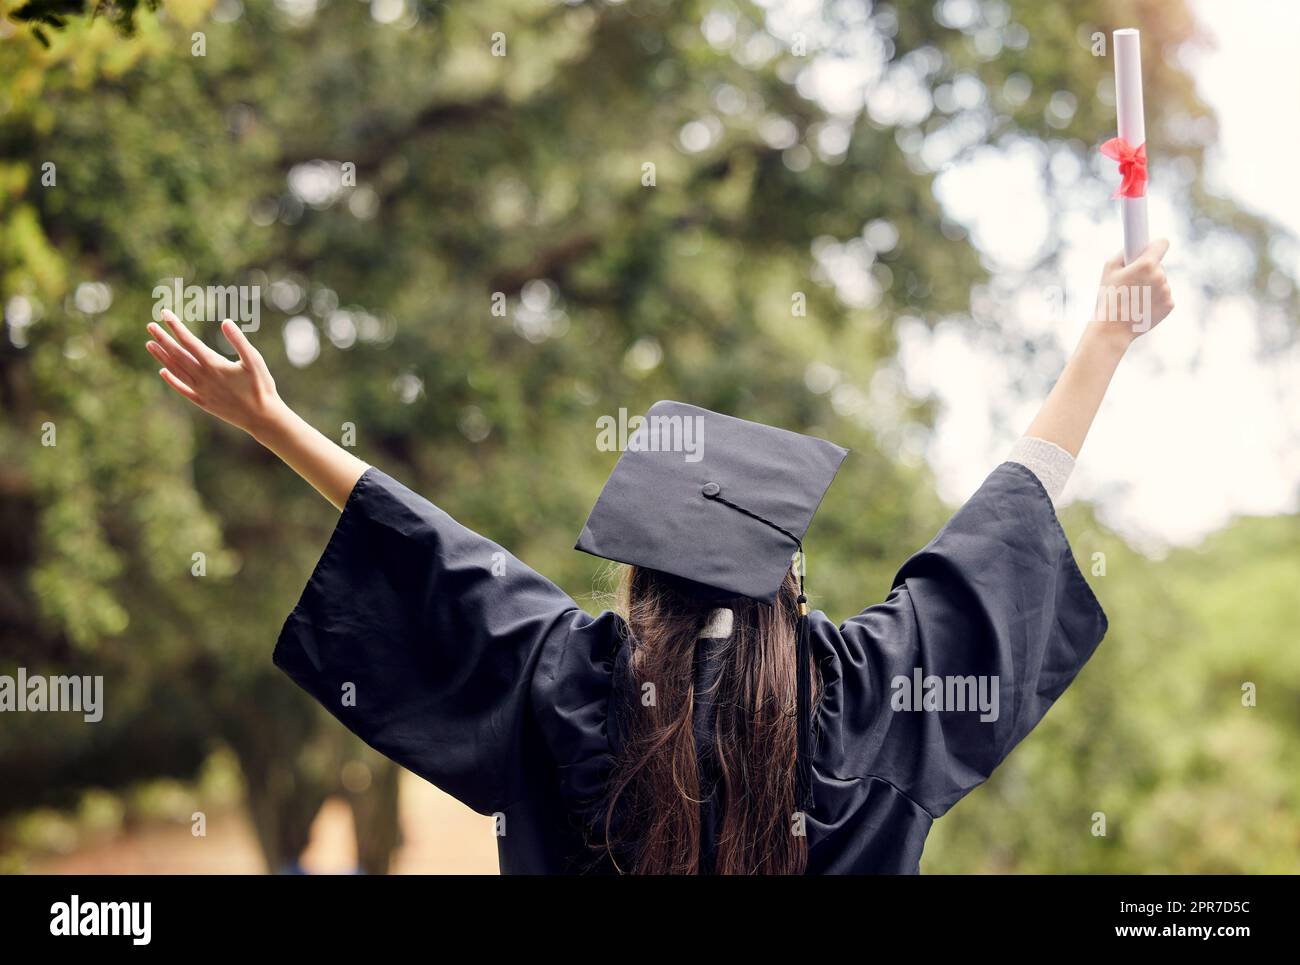 On the path to success and happiness. Rearview shot of a young woman cheering on graduation day. Stock Photo